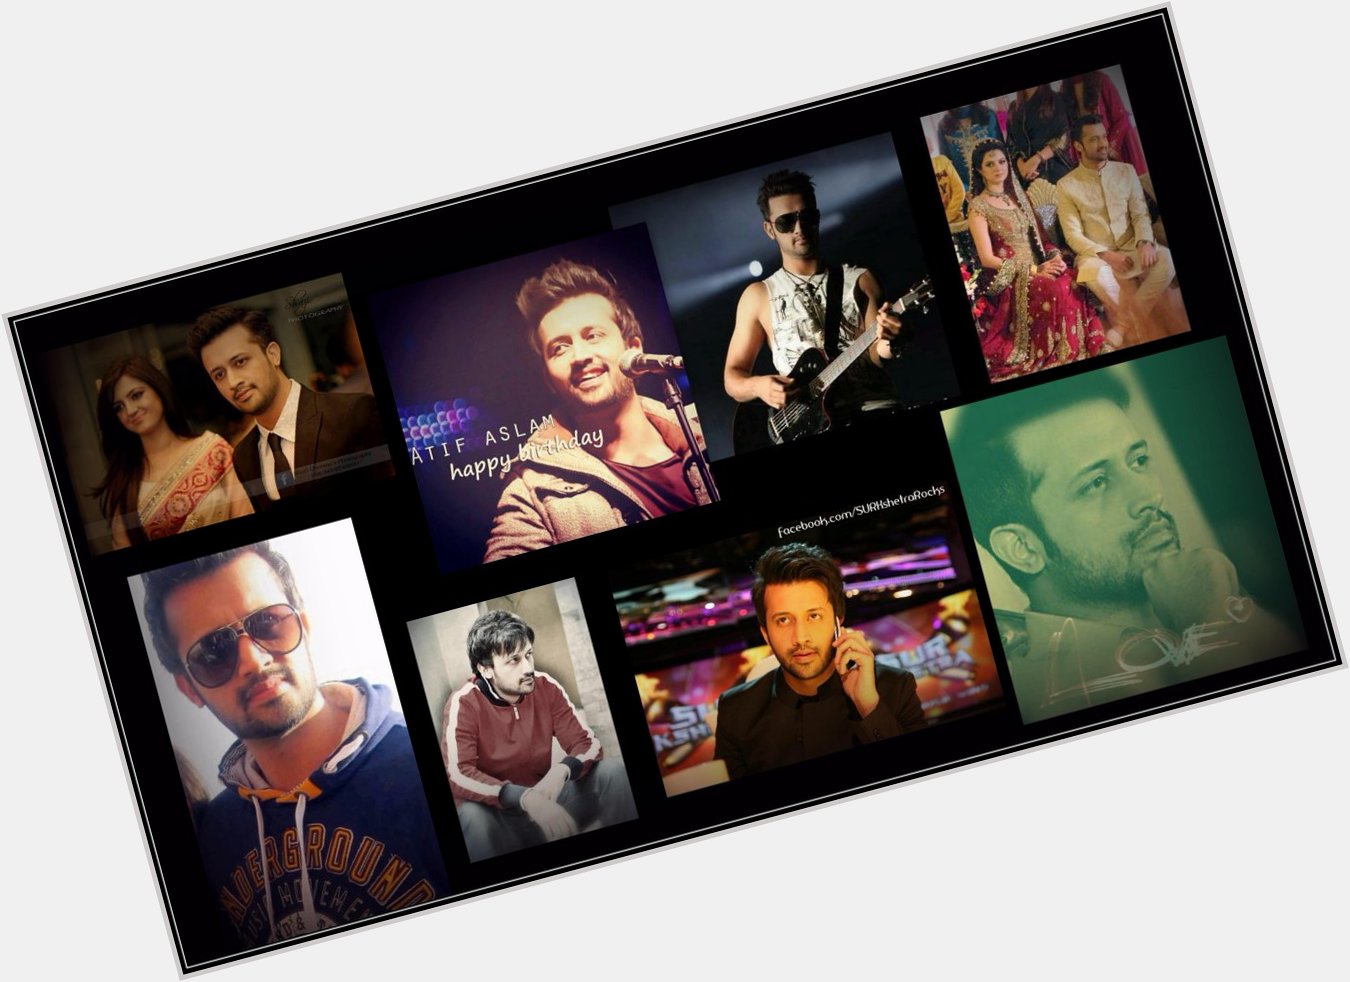  happy birthday atif aslam... may u be blessed always ... we all love u lots nd will be there with u always 